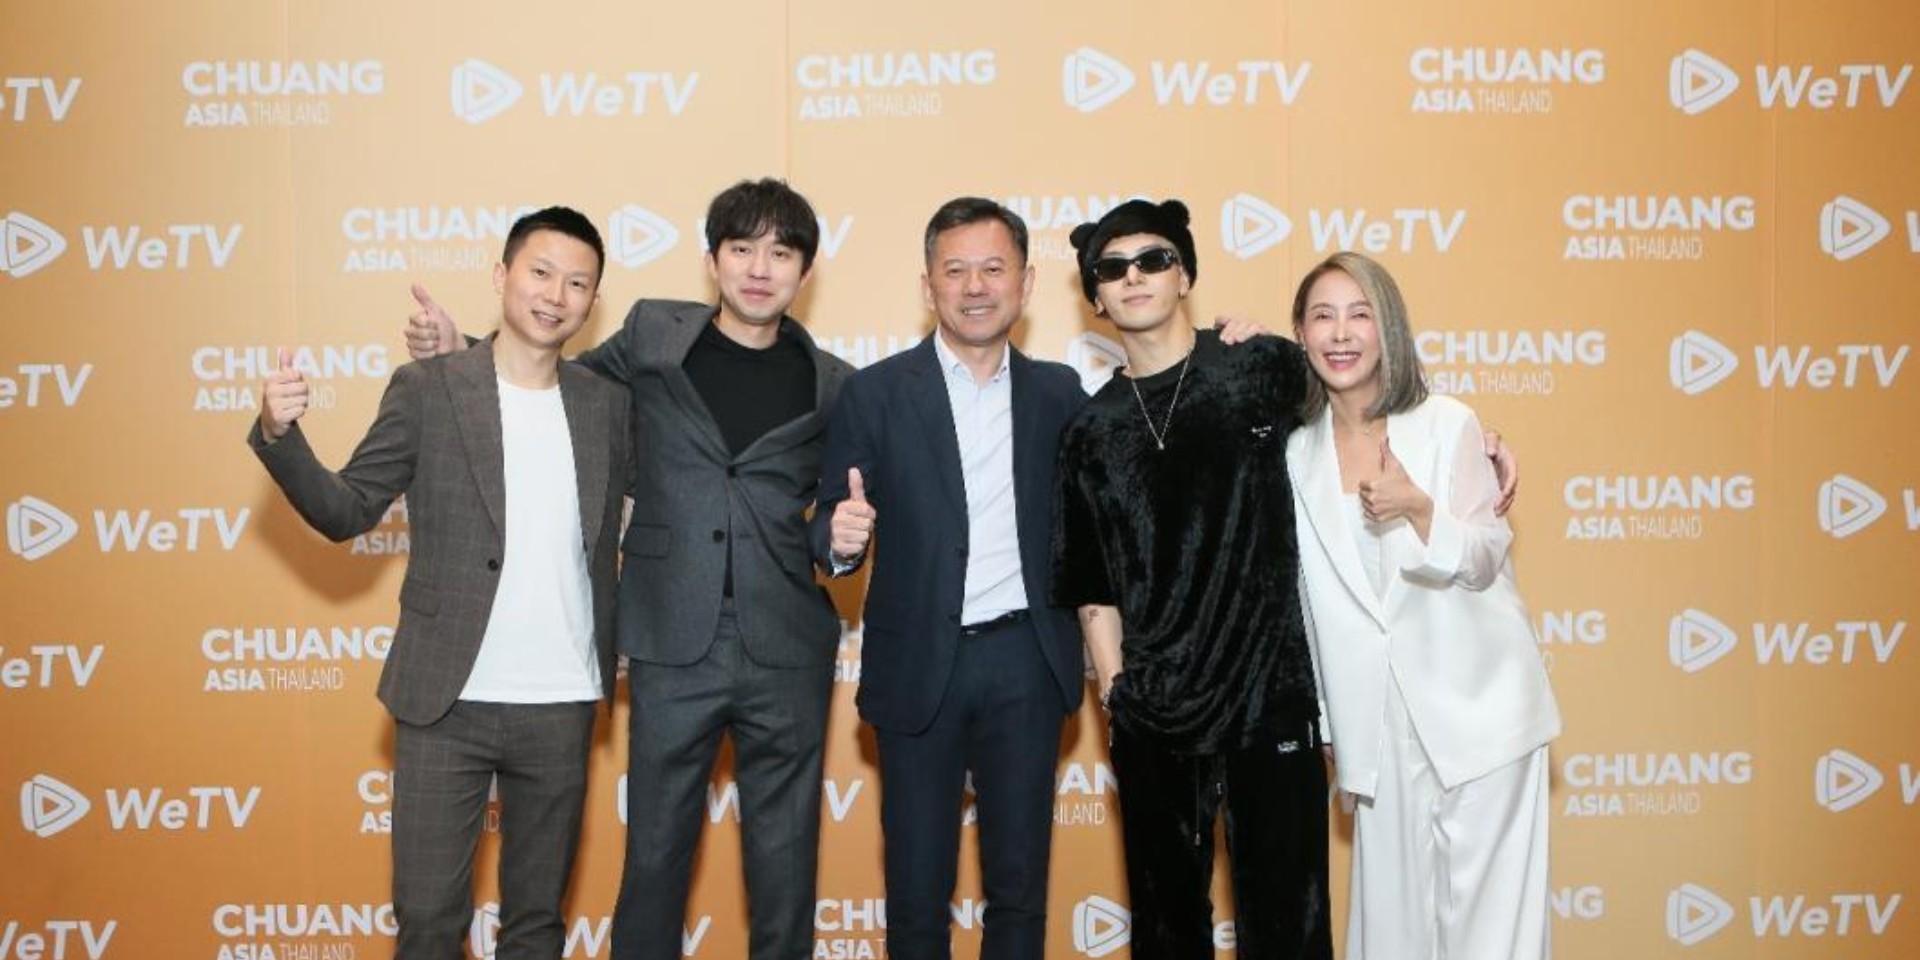 RYCE Entertainment co-founders Jackson Wang and Daryl K team up with Tencent for ‘CHUANG ASIA'